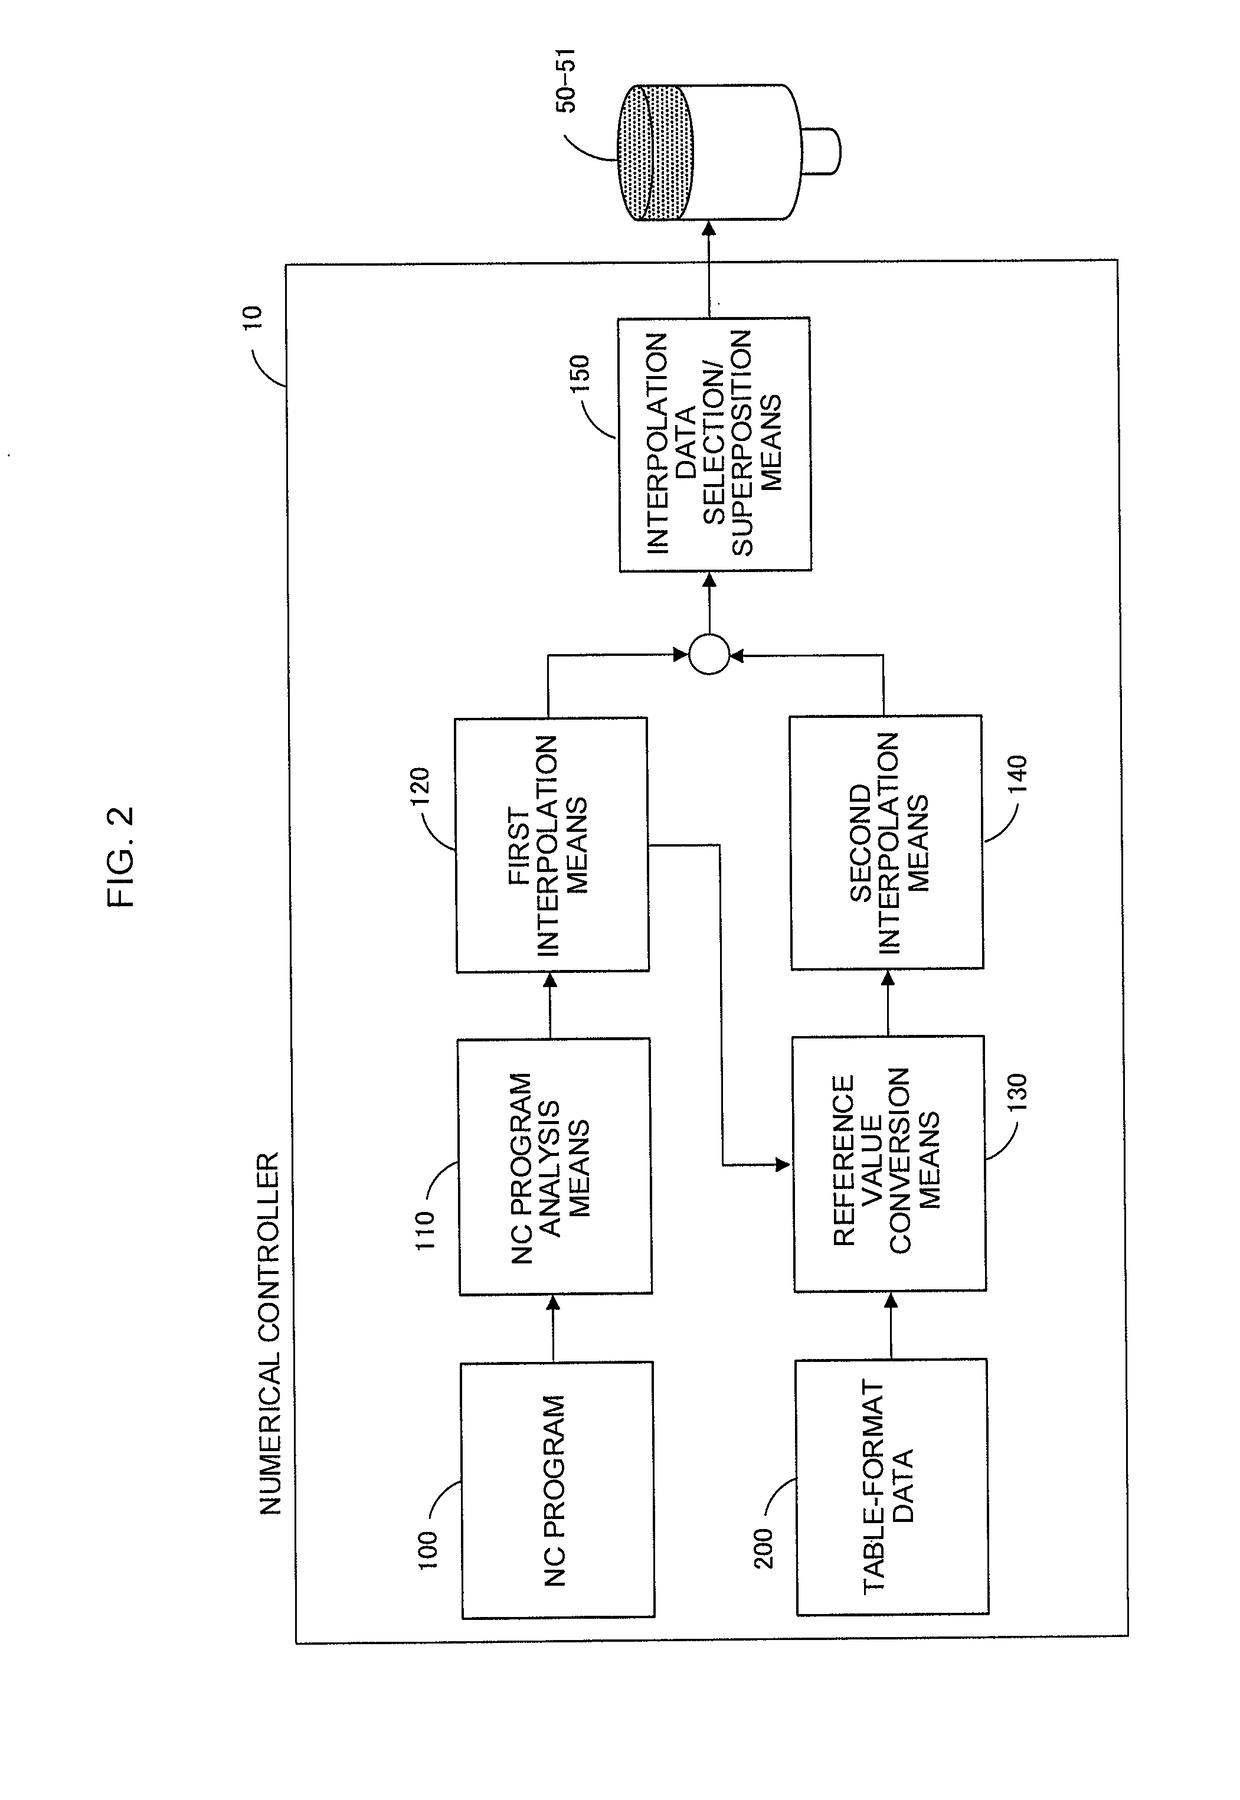 Numerical controller executing operation by a movement command and table-format data